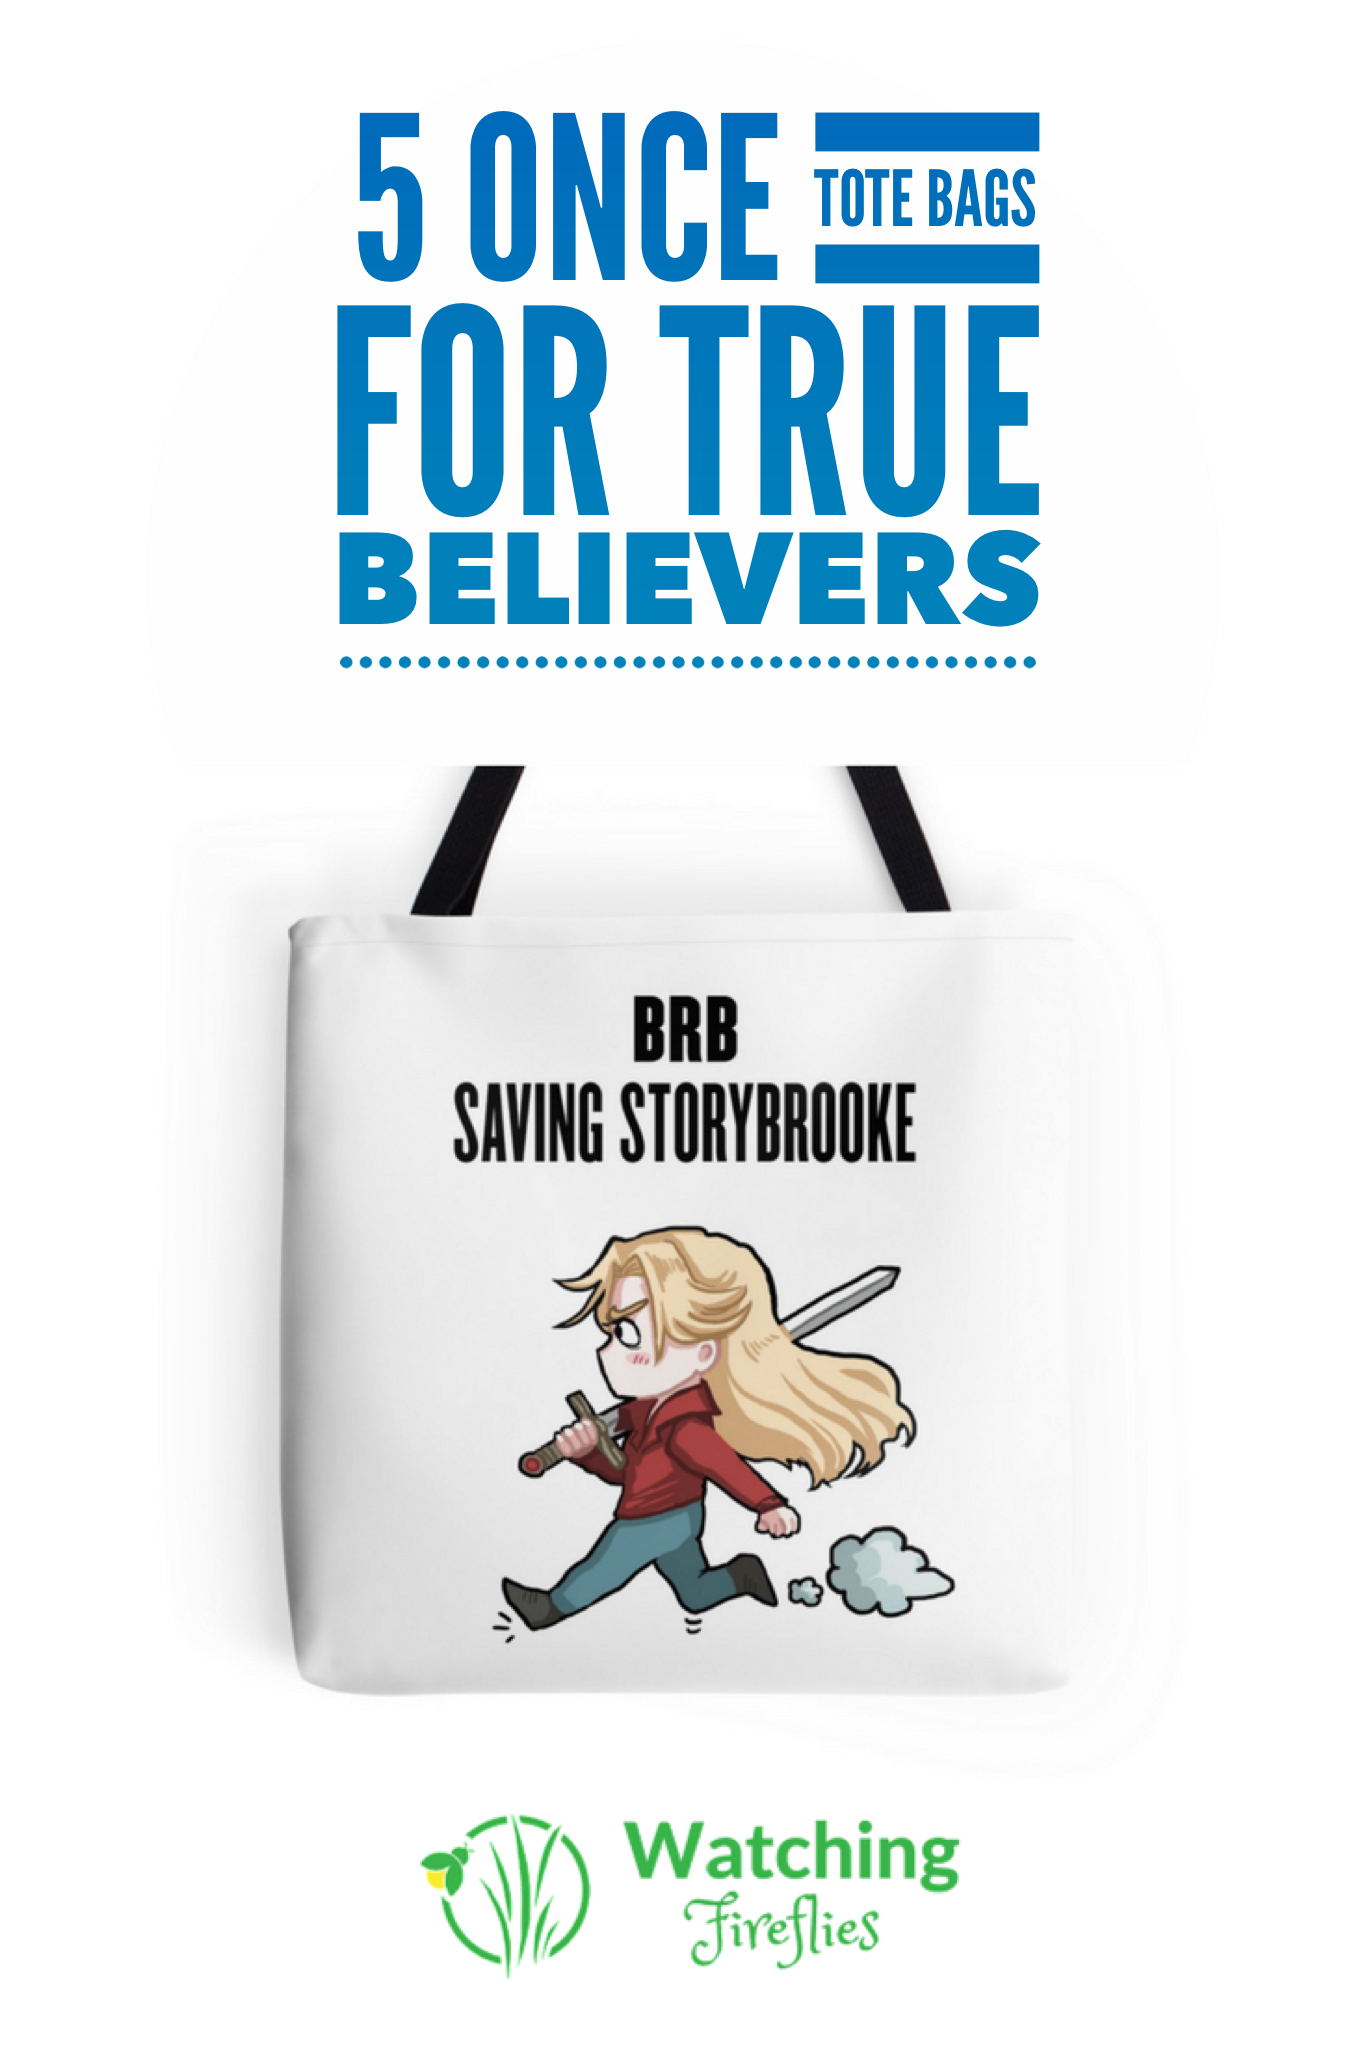 5 Once Totes Bags for True Believers